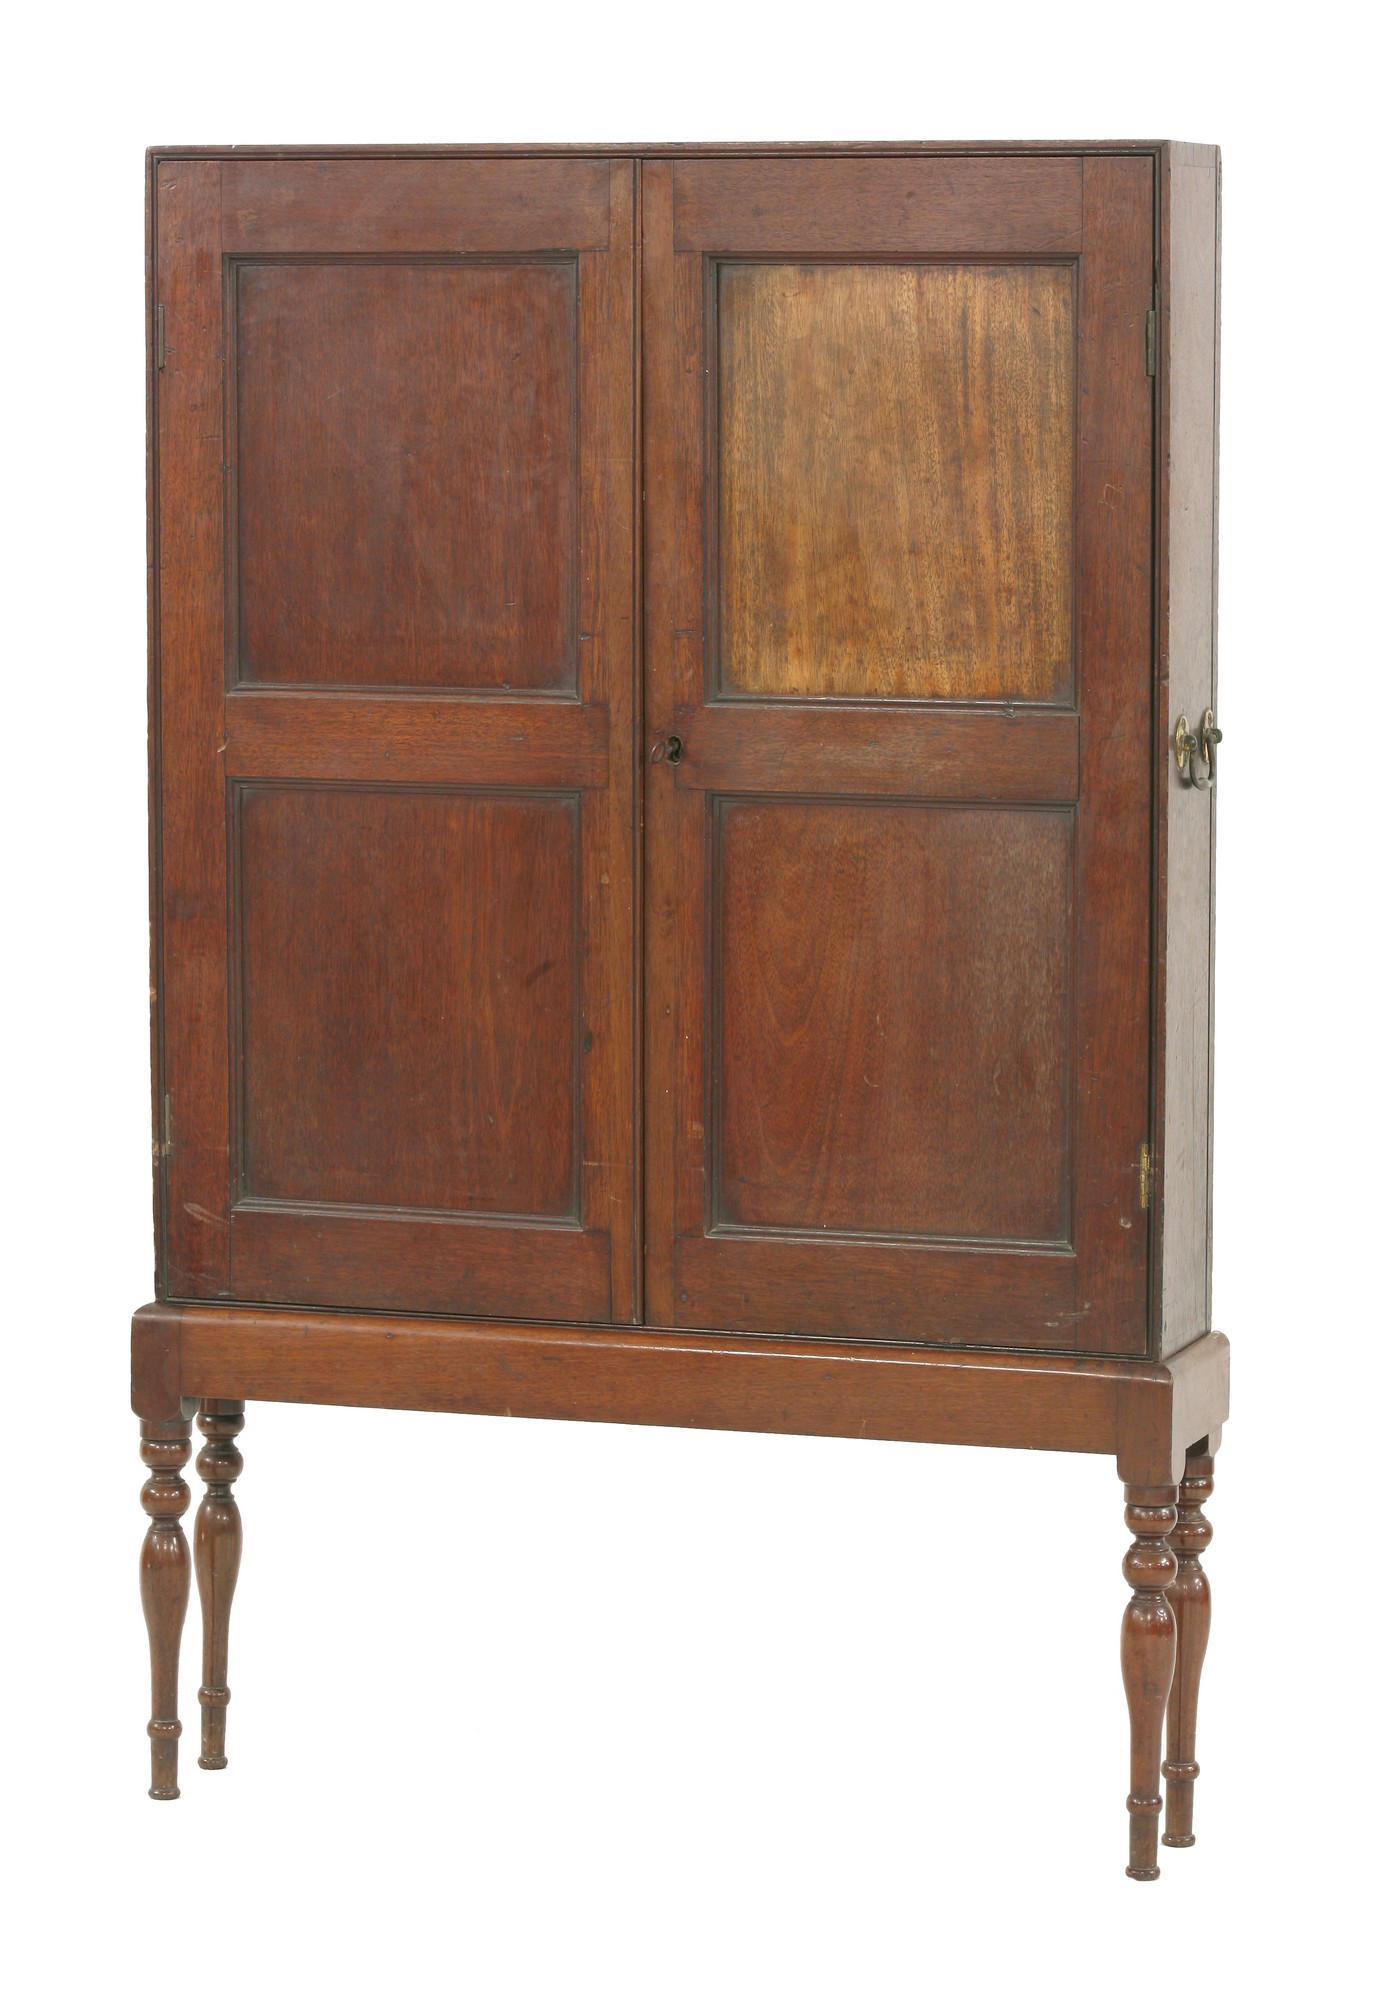 A mahogany campaign medicine cabinet,
with panelled cupboard doors, enclosing five shelves raised on